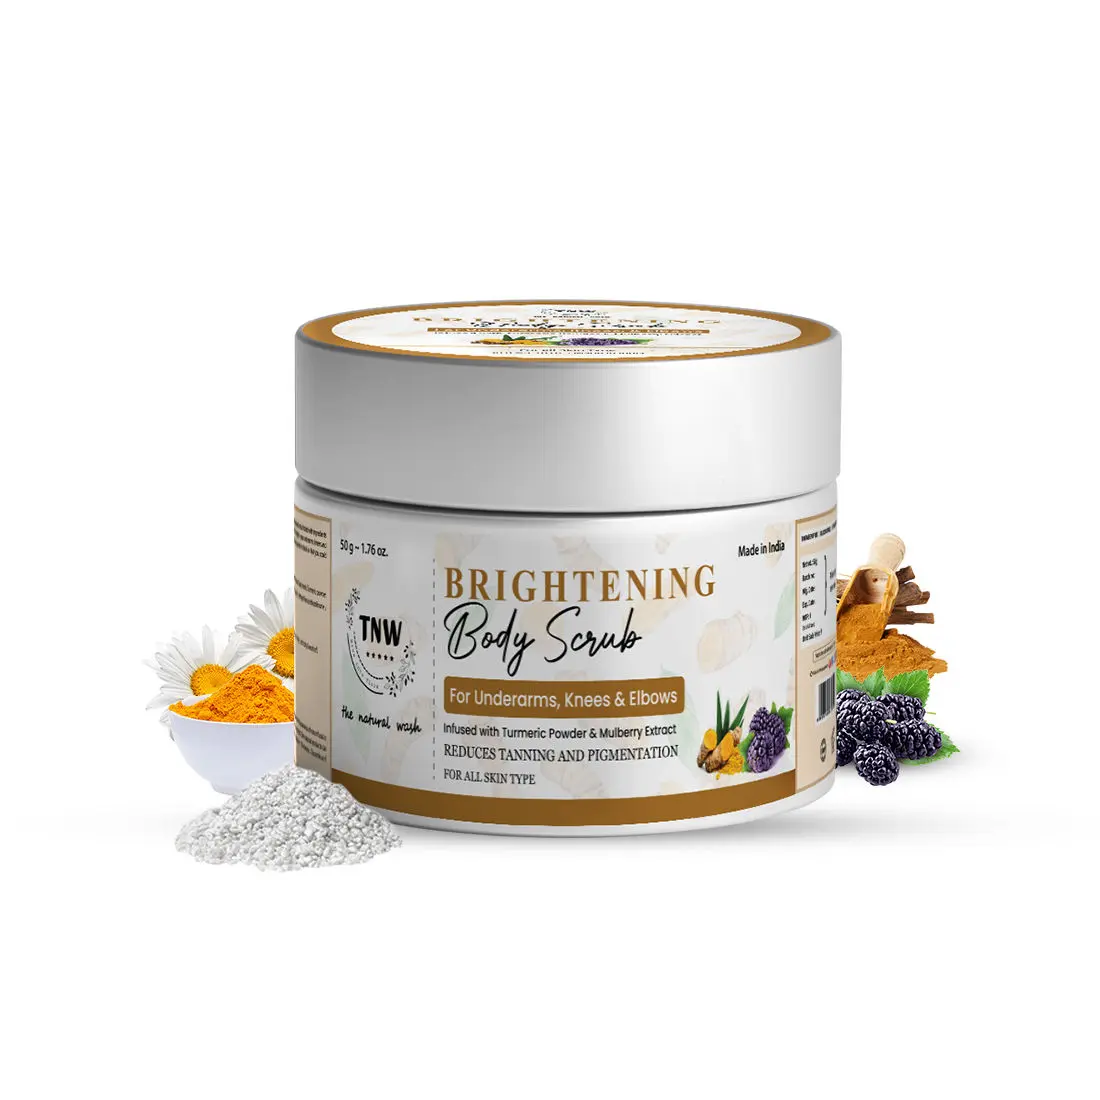 TNW-The Natural Wash Brightening Body Scrub With Turmeric Extracts and Mulberry Extracts | For Underarms, Knees, and Elbows | Brightening | Hydrating